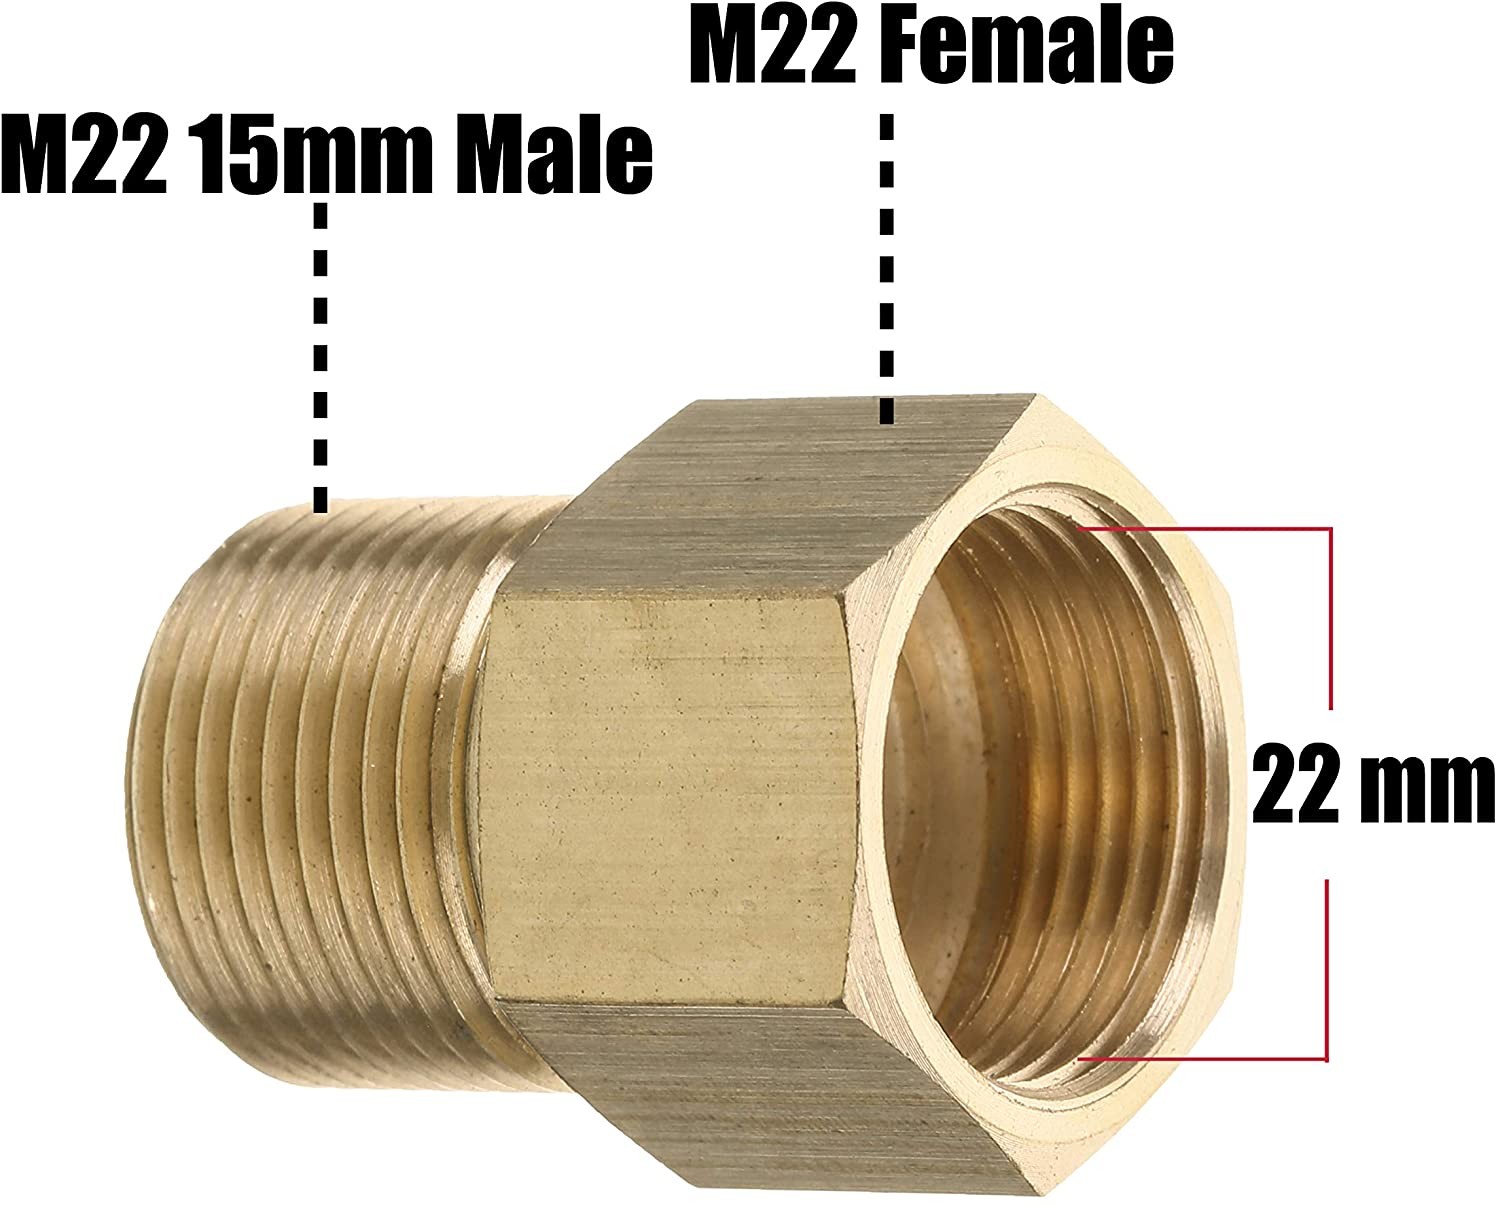 Pressure Washer Coupler, Metric M22 15mm Male Thread to M22 14mm Female Fitting